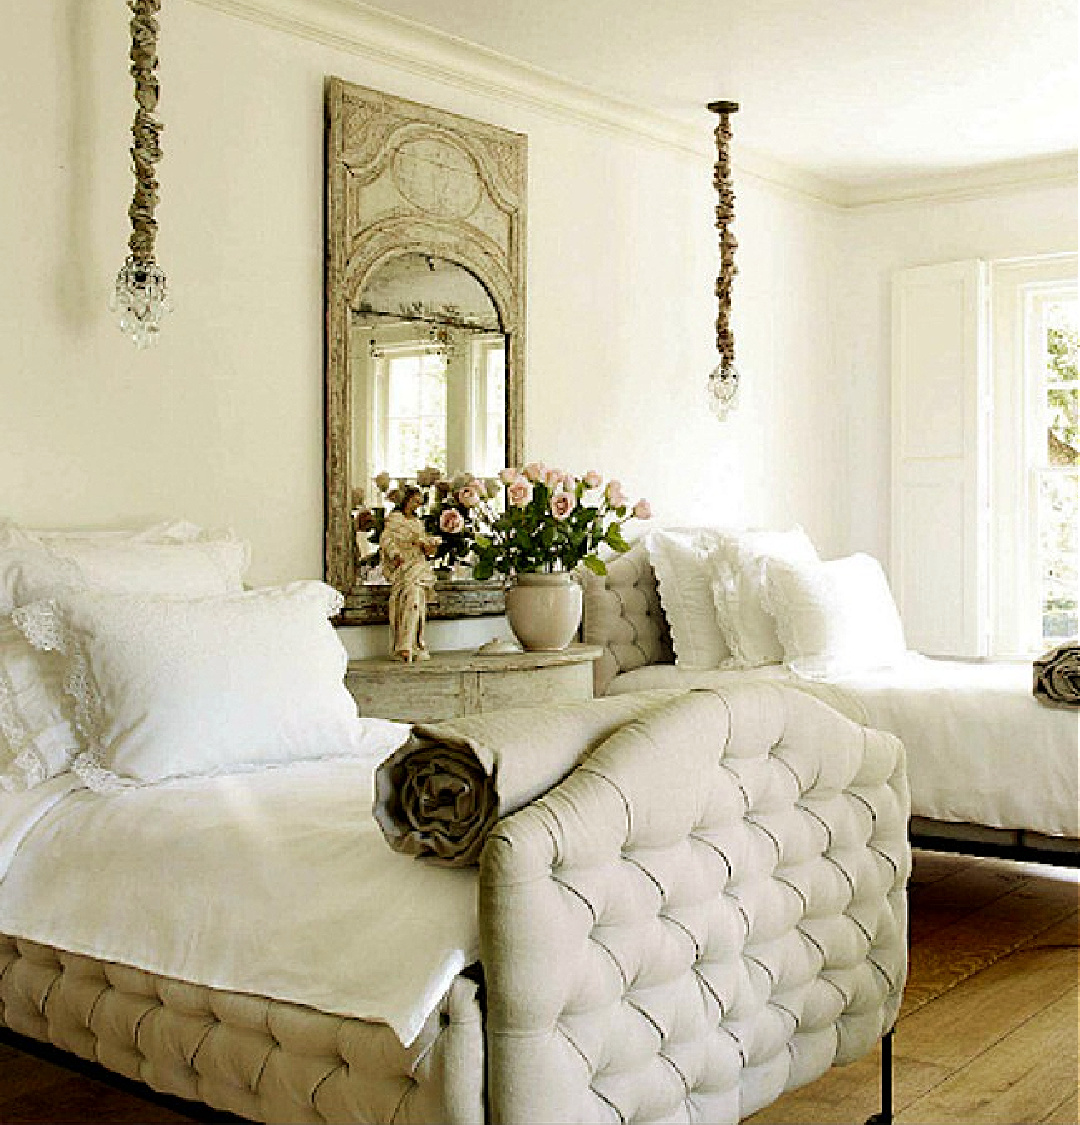 Beautiful French country bedroom with elegant tufted beds, antiques, and design by Pamela Pierce of MILIEU magazine. #pamelapierce #frenchcountrybedroom